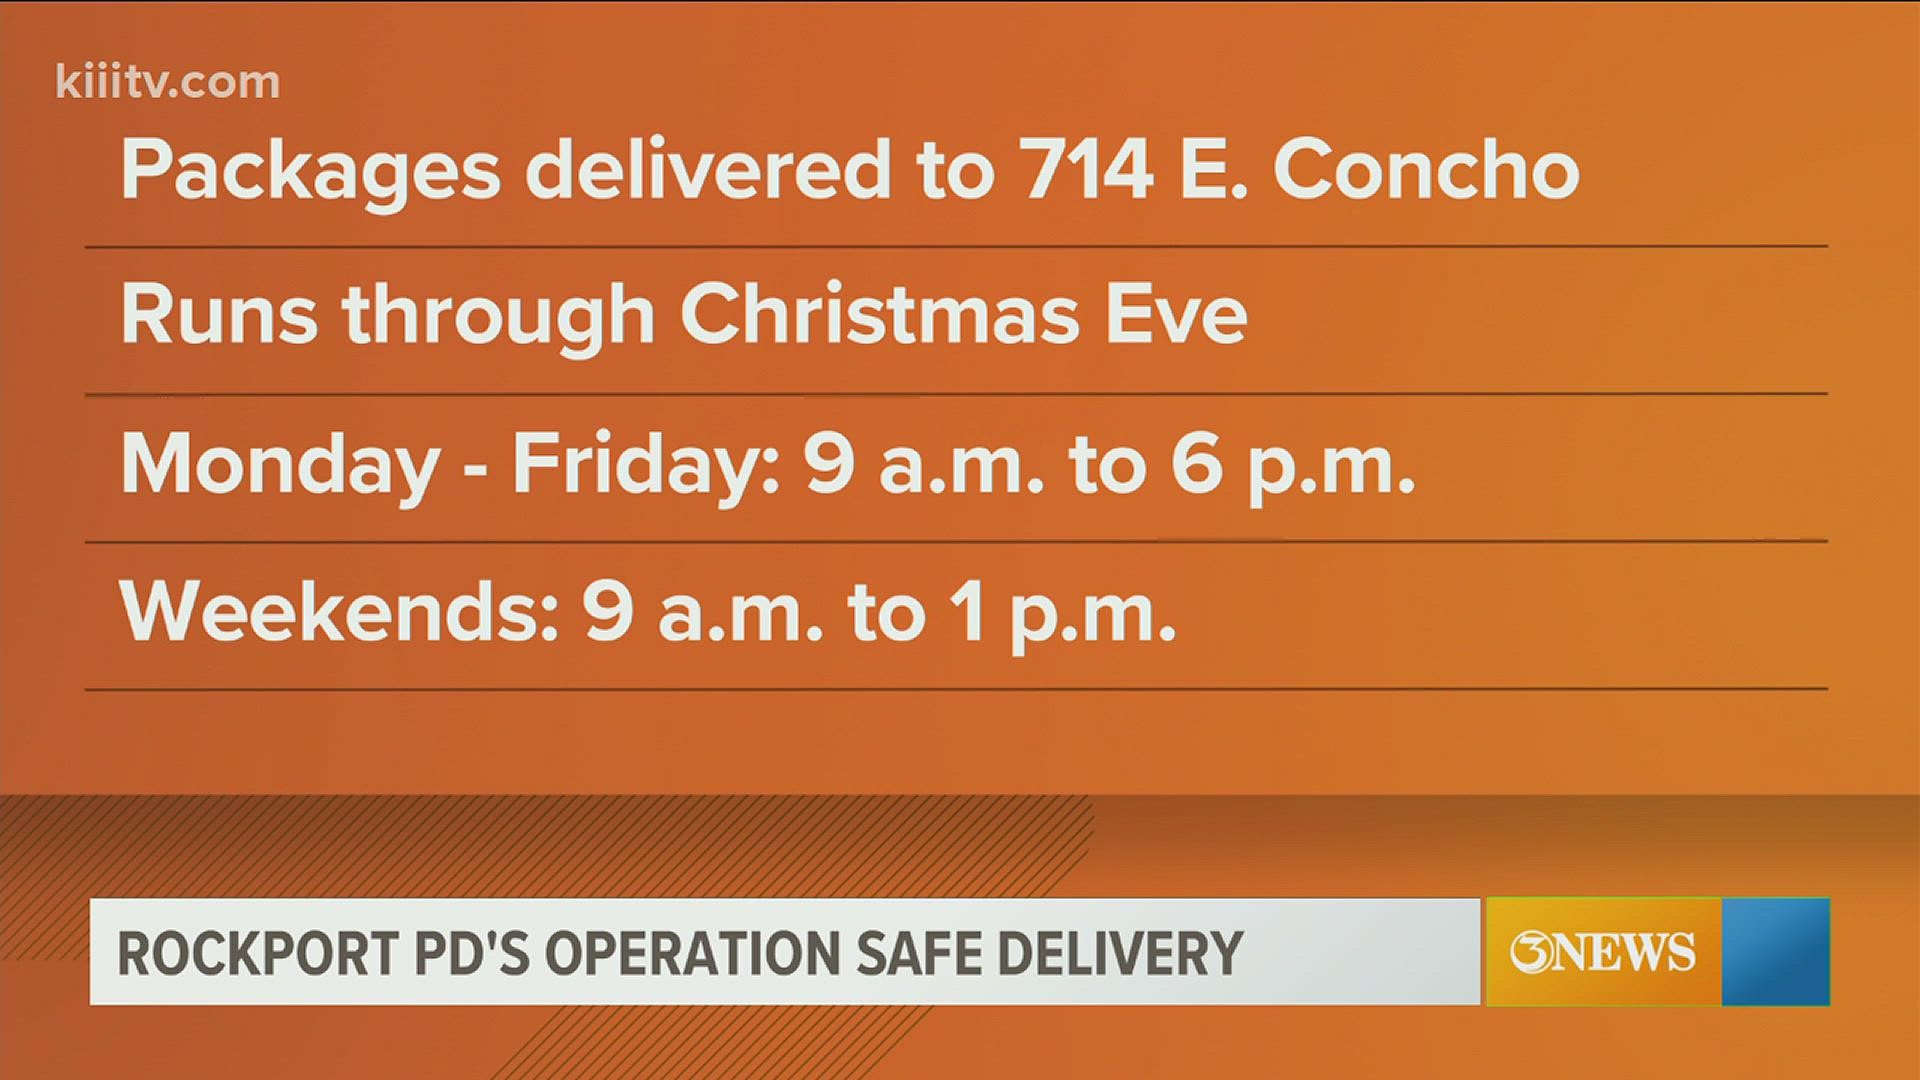 Rockport PD will accept packages from major delivery carriers, excluding USPS, through Christmas Eve.